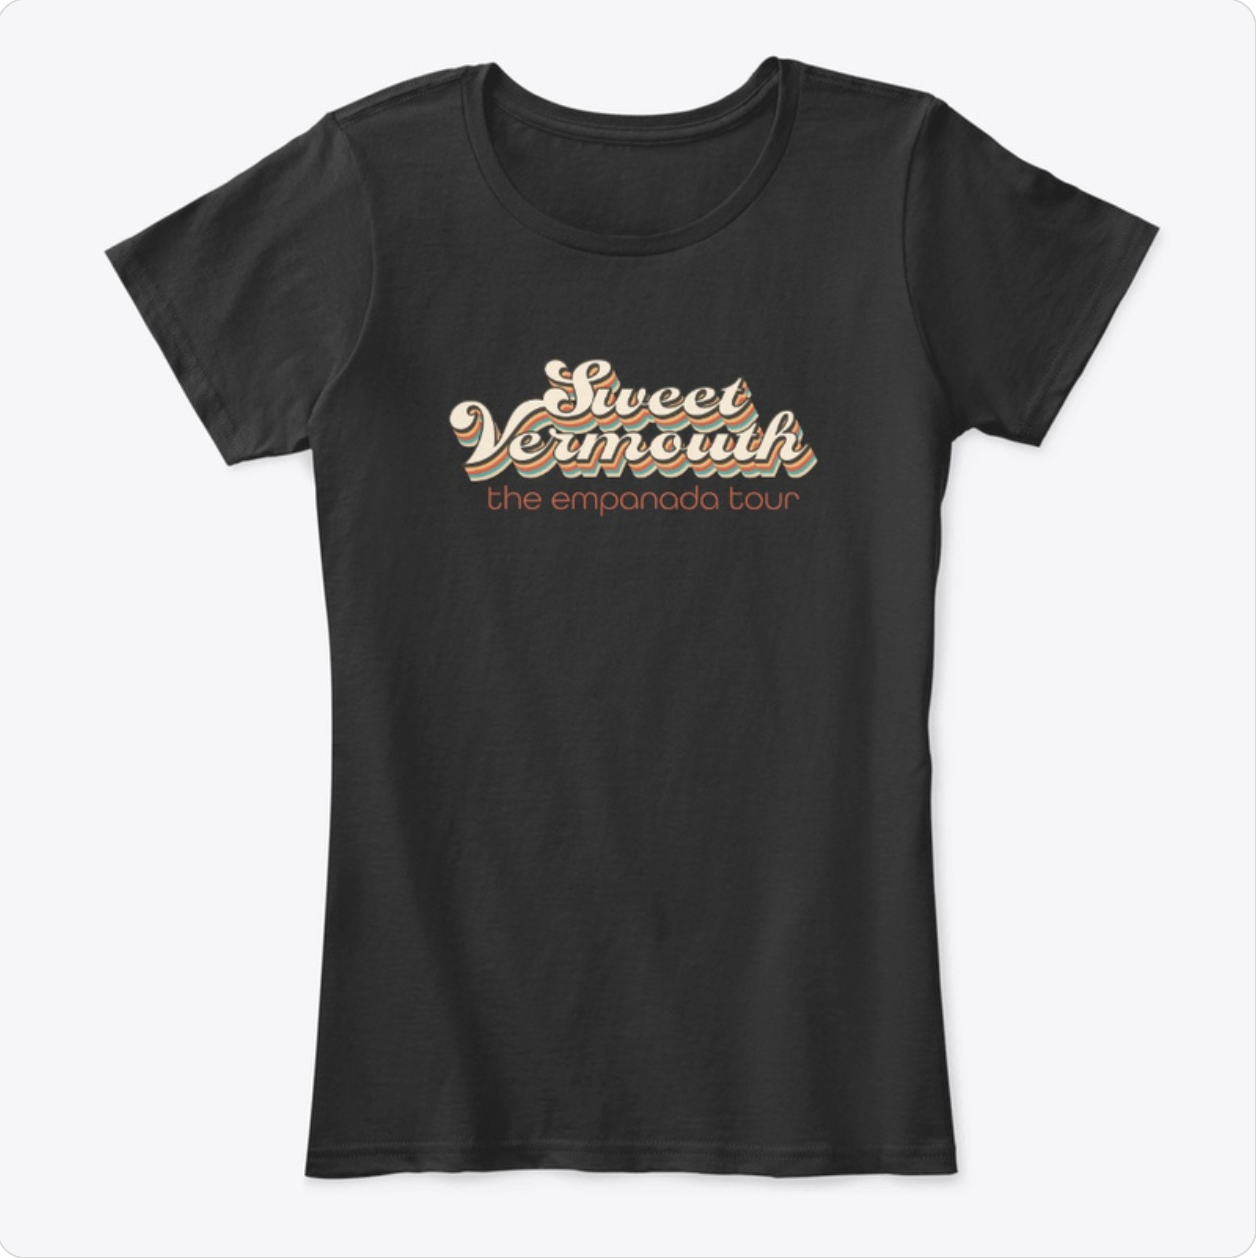 Women's Tee - $25.99 (other colors available.)